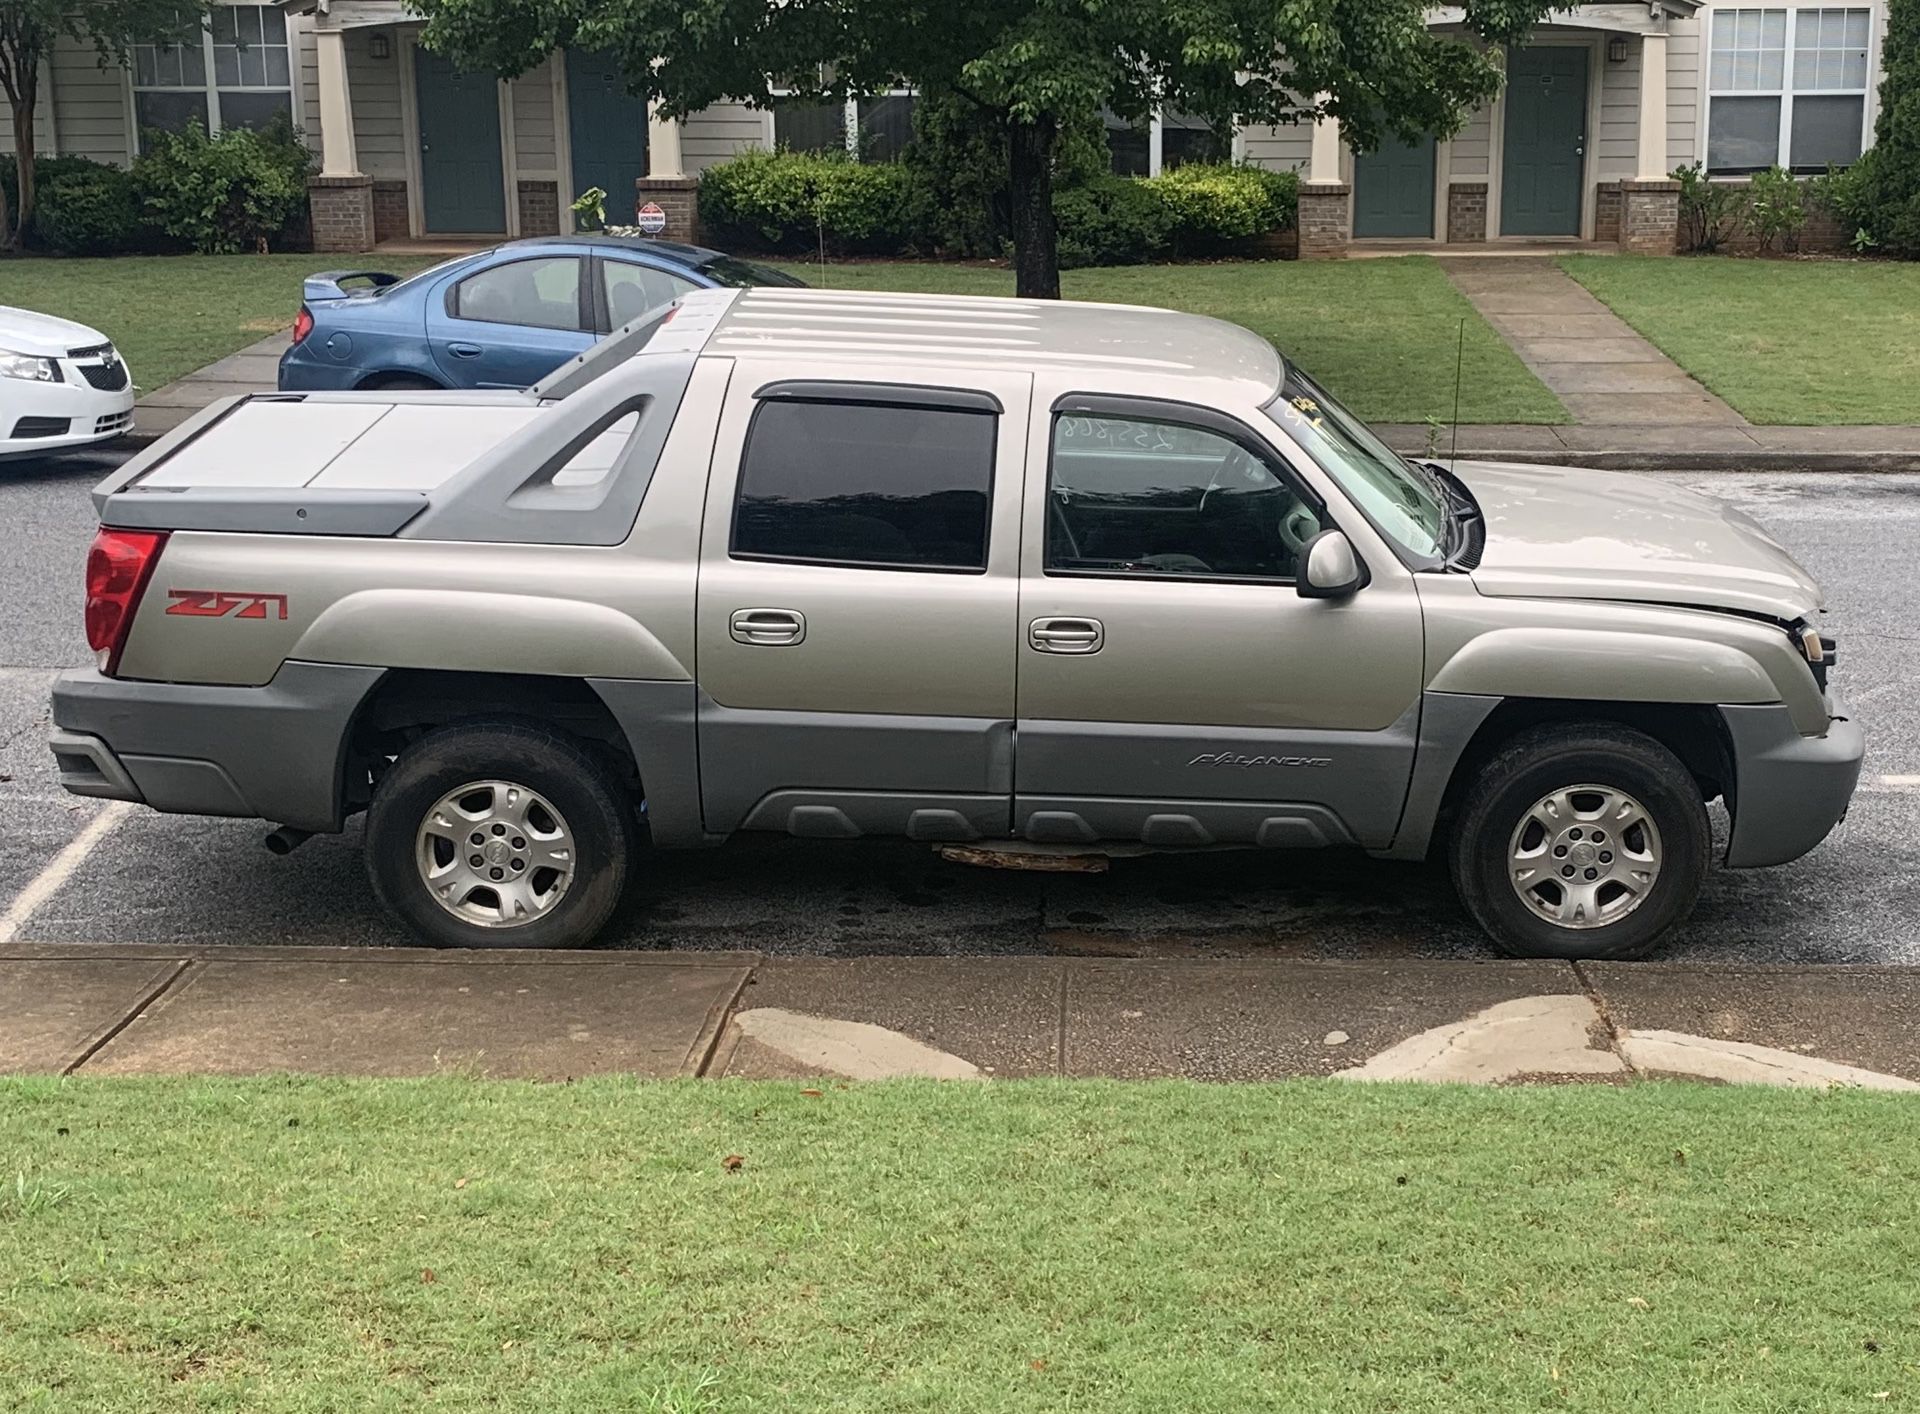 2002 Chevy Avalanche (Parting Out)